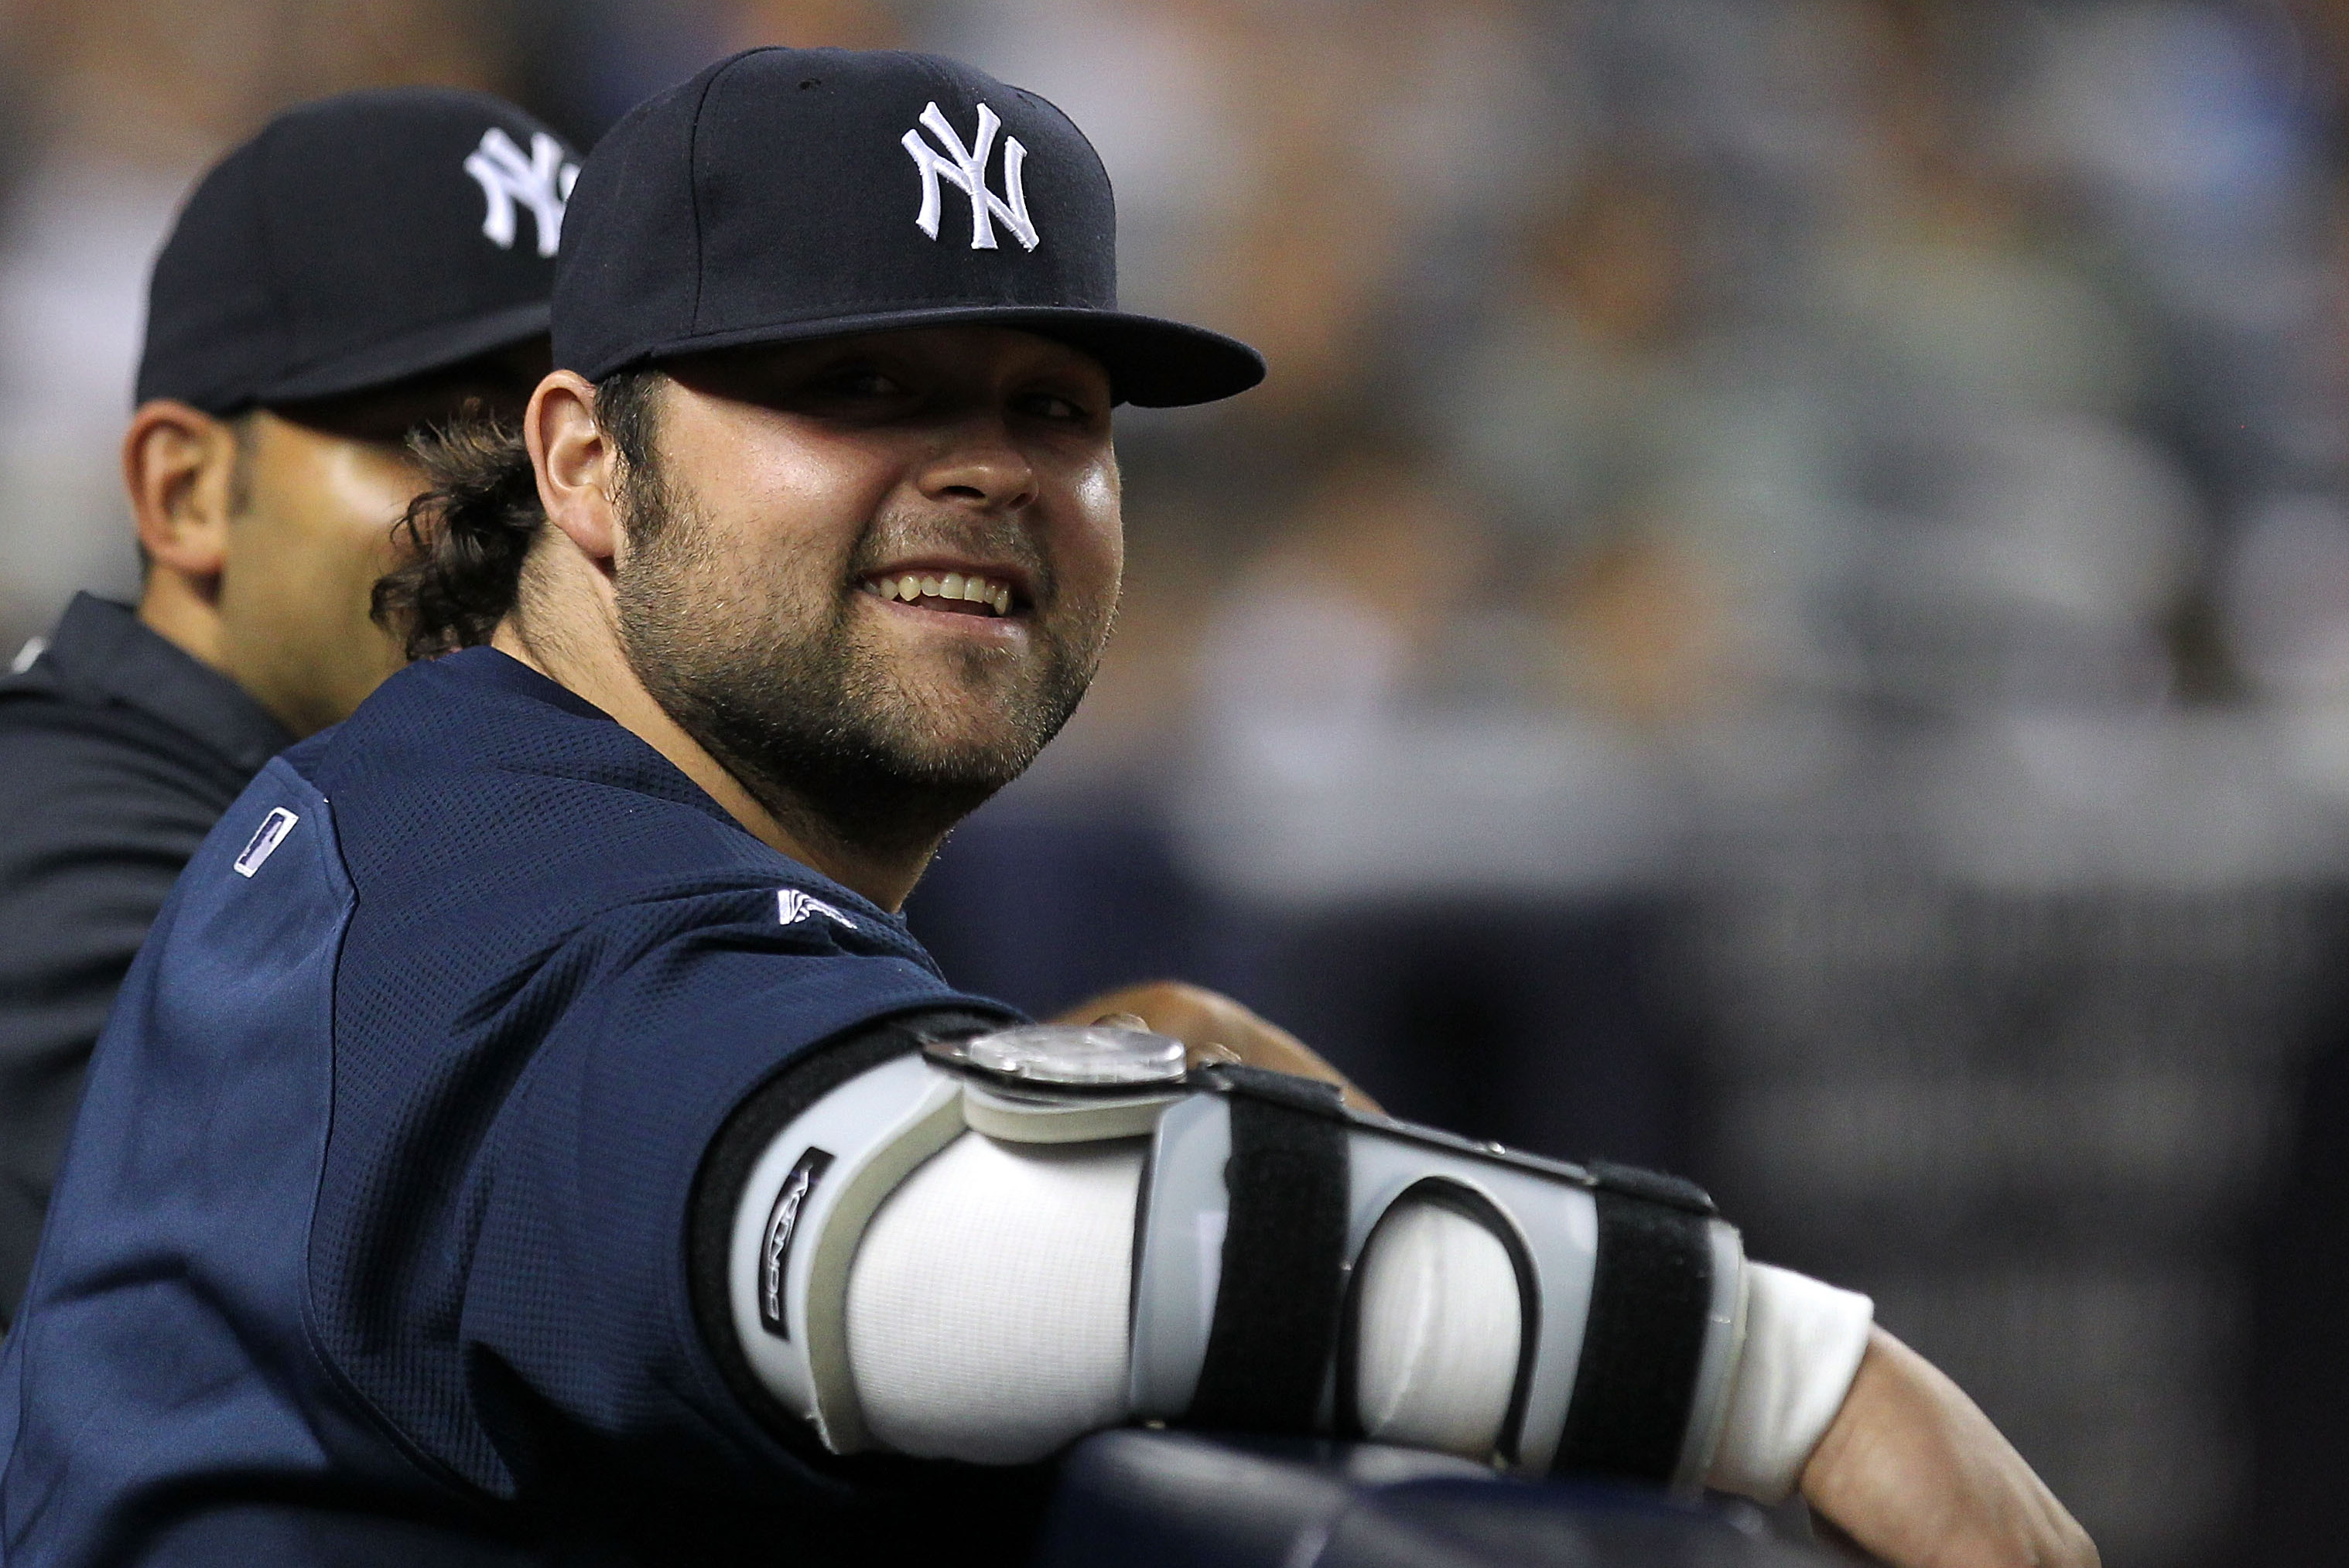 Yankees pitcher Joba Chamberlain has surgery after dislocating ankle 